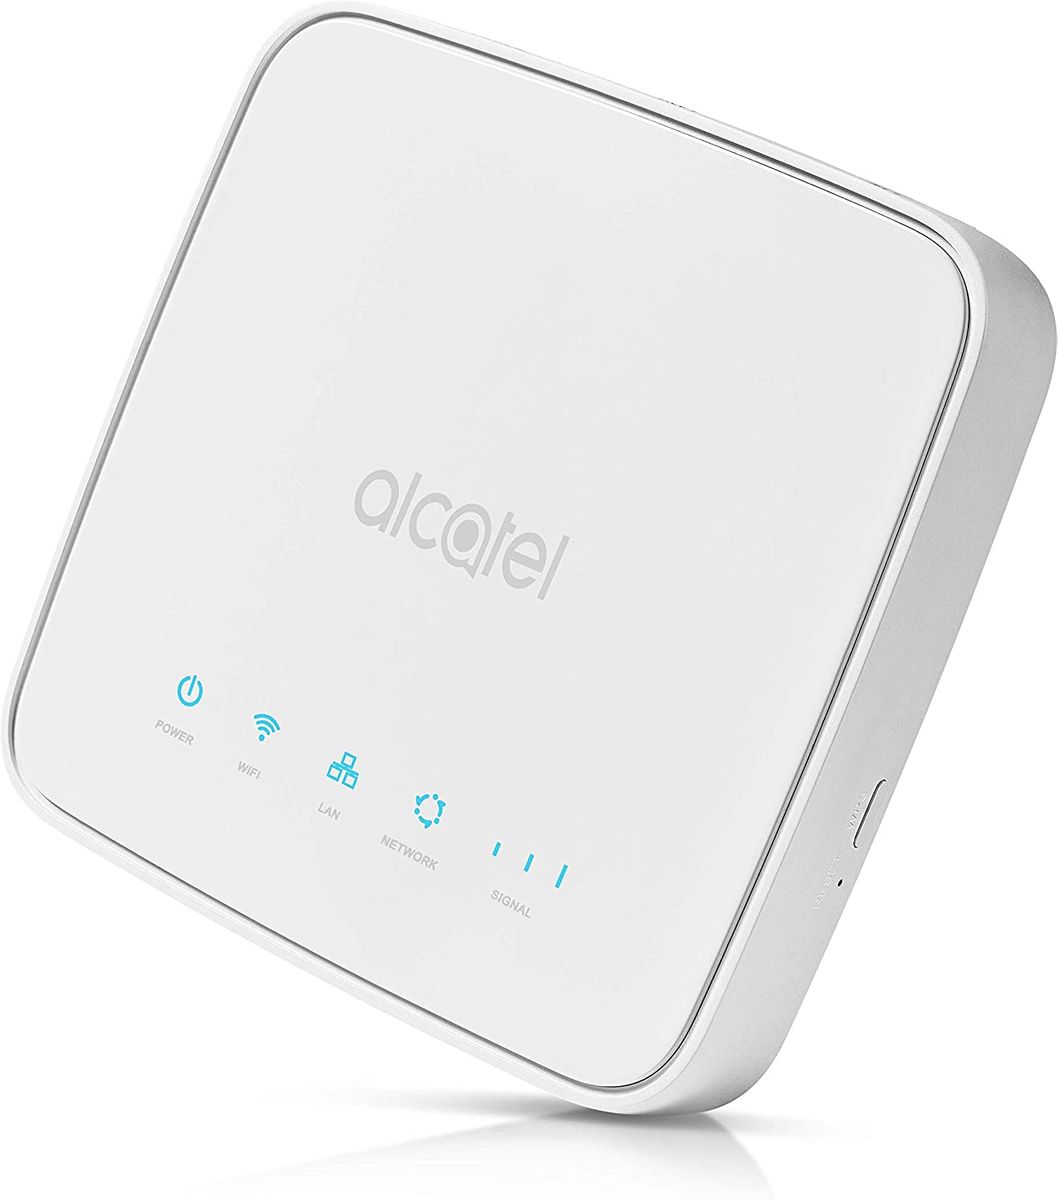 Alcatel HH40 4G/LTE Router (CAT4 | 150Mbps Download | 50Mbps Upload) Includes 2 External LTE Antennas, WiFi 802.11b/g/n, Hotspot Function, WPS, 2 x 100Mbps LAN Port - White